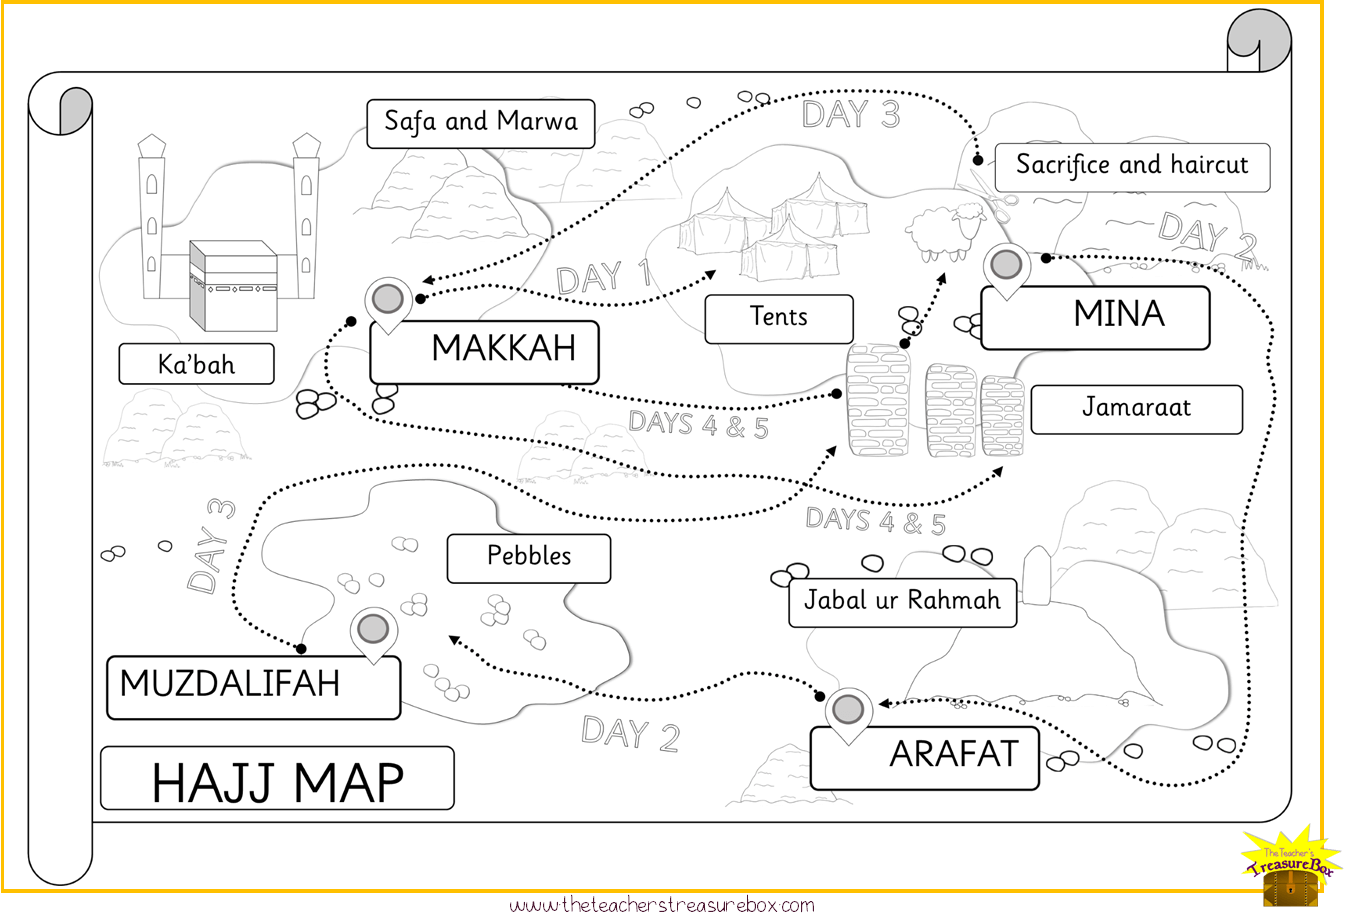 Hajj Map in Black and White